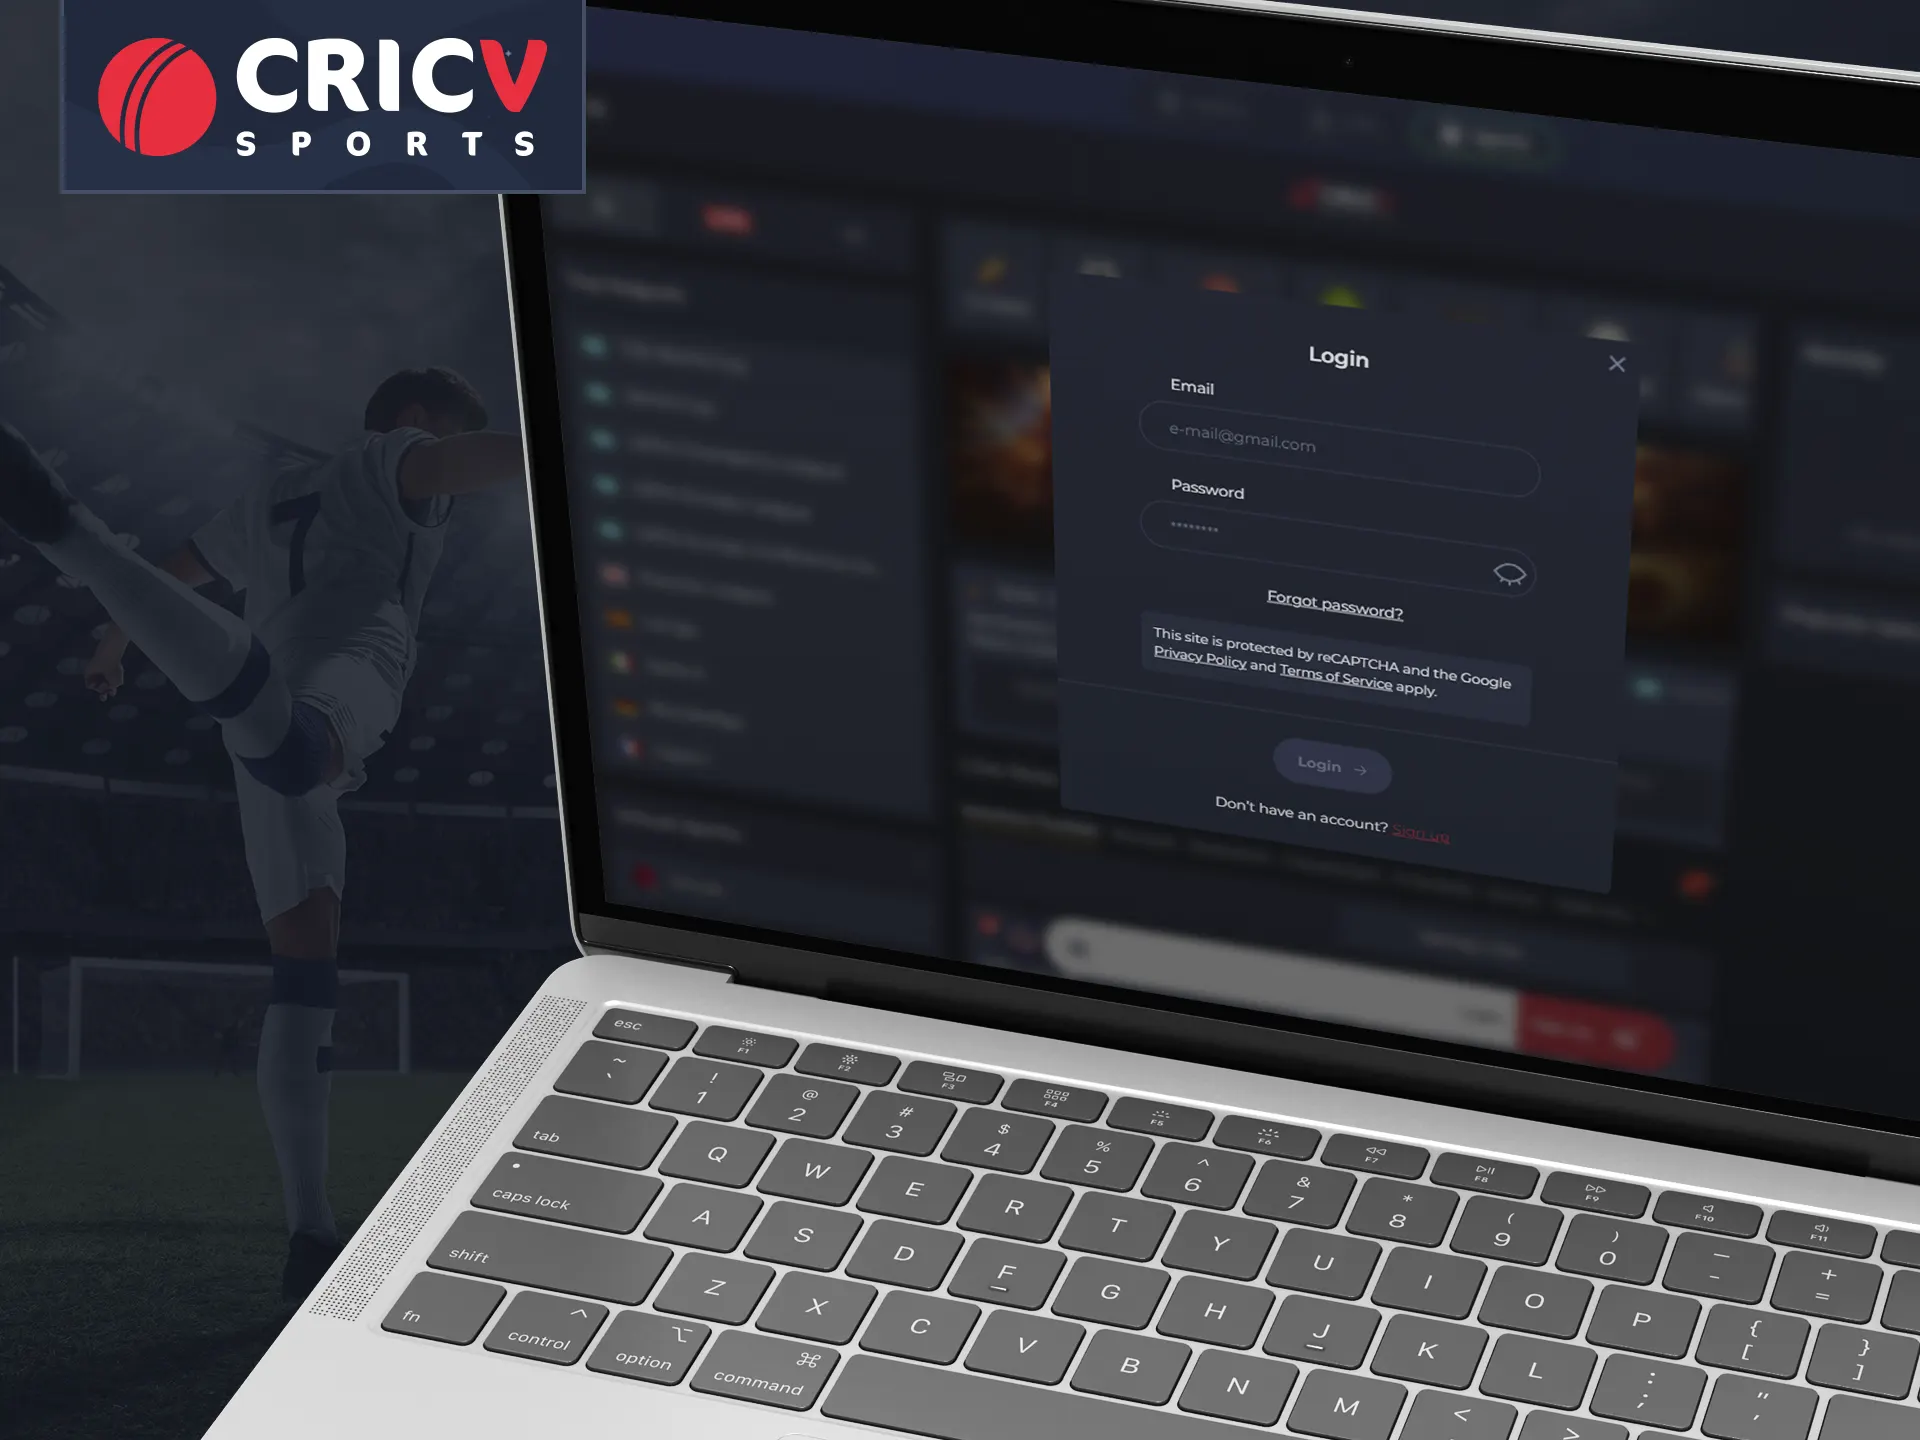 Log into your account on the Cricv website.